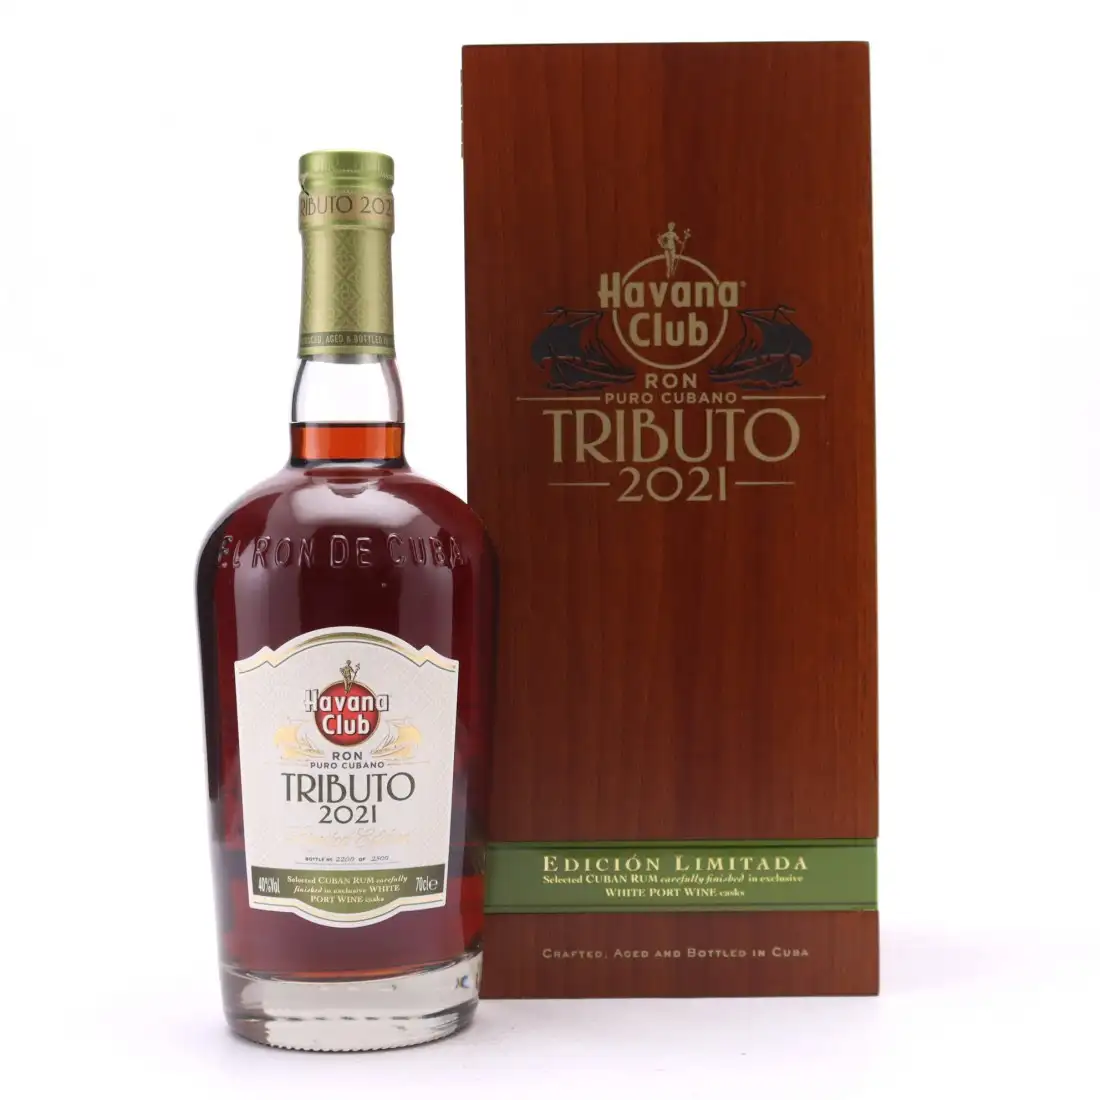 Image of the front of the bottle of the rum Tributo